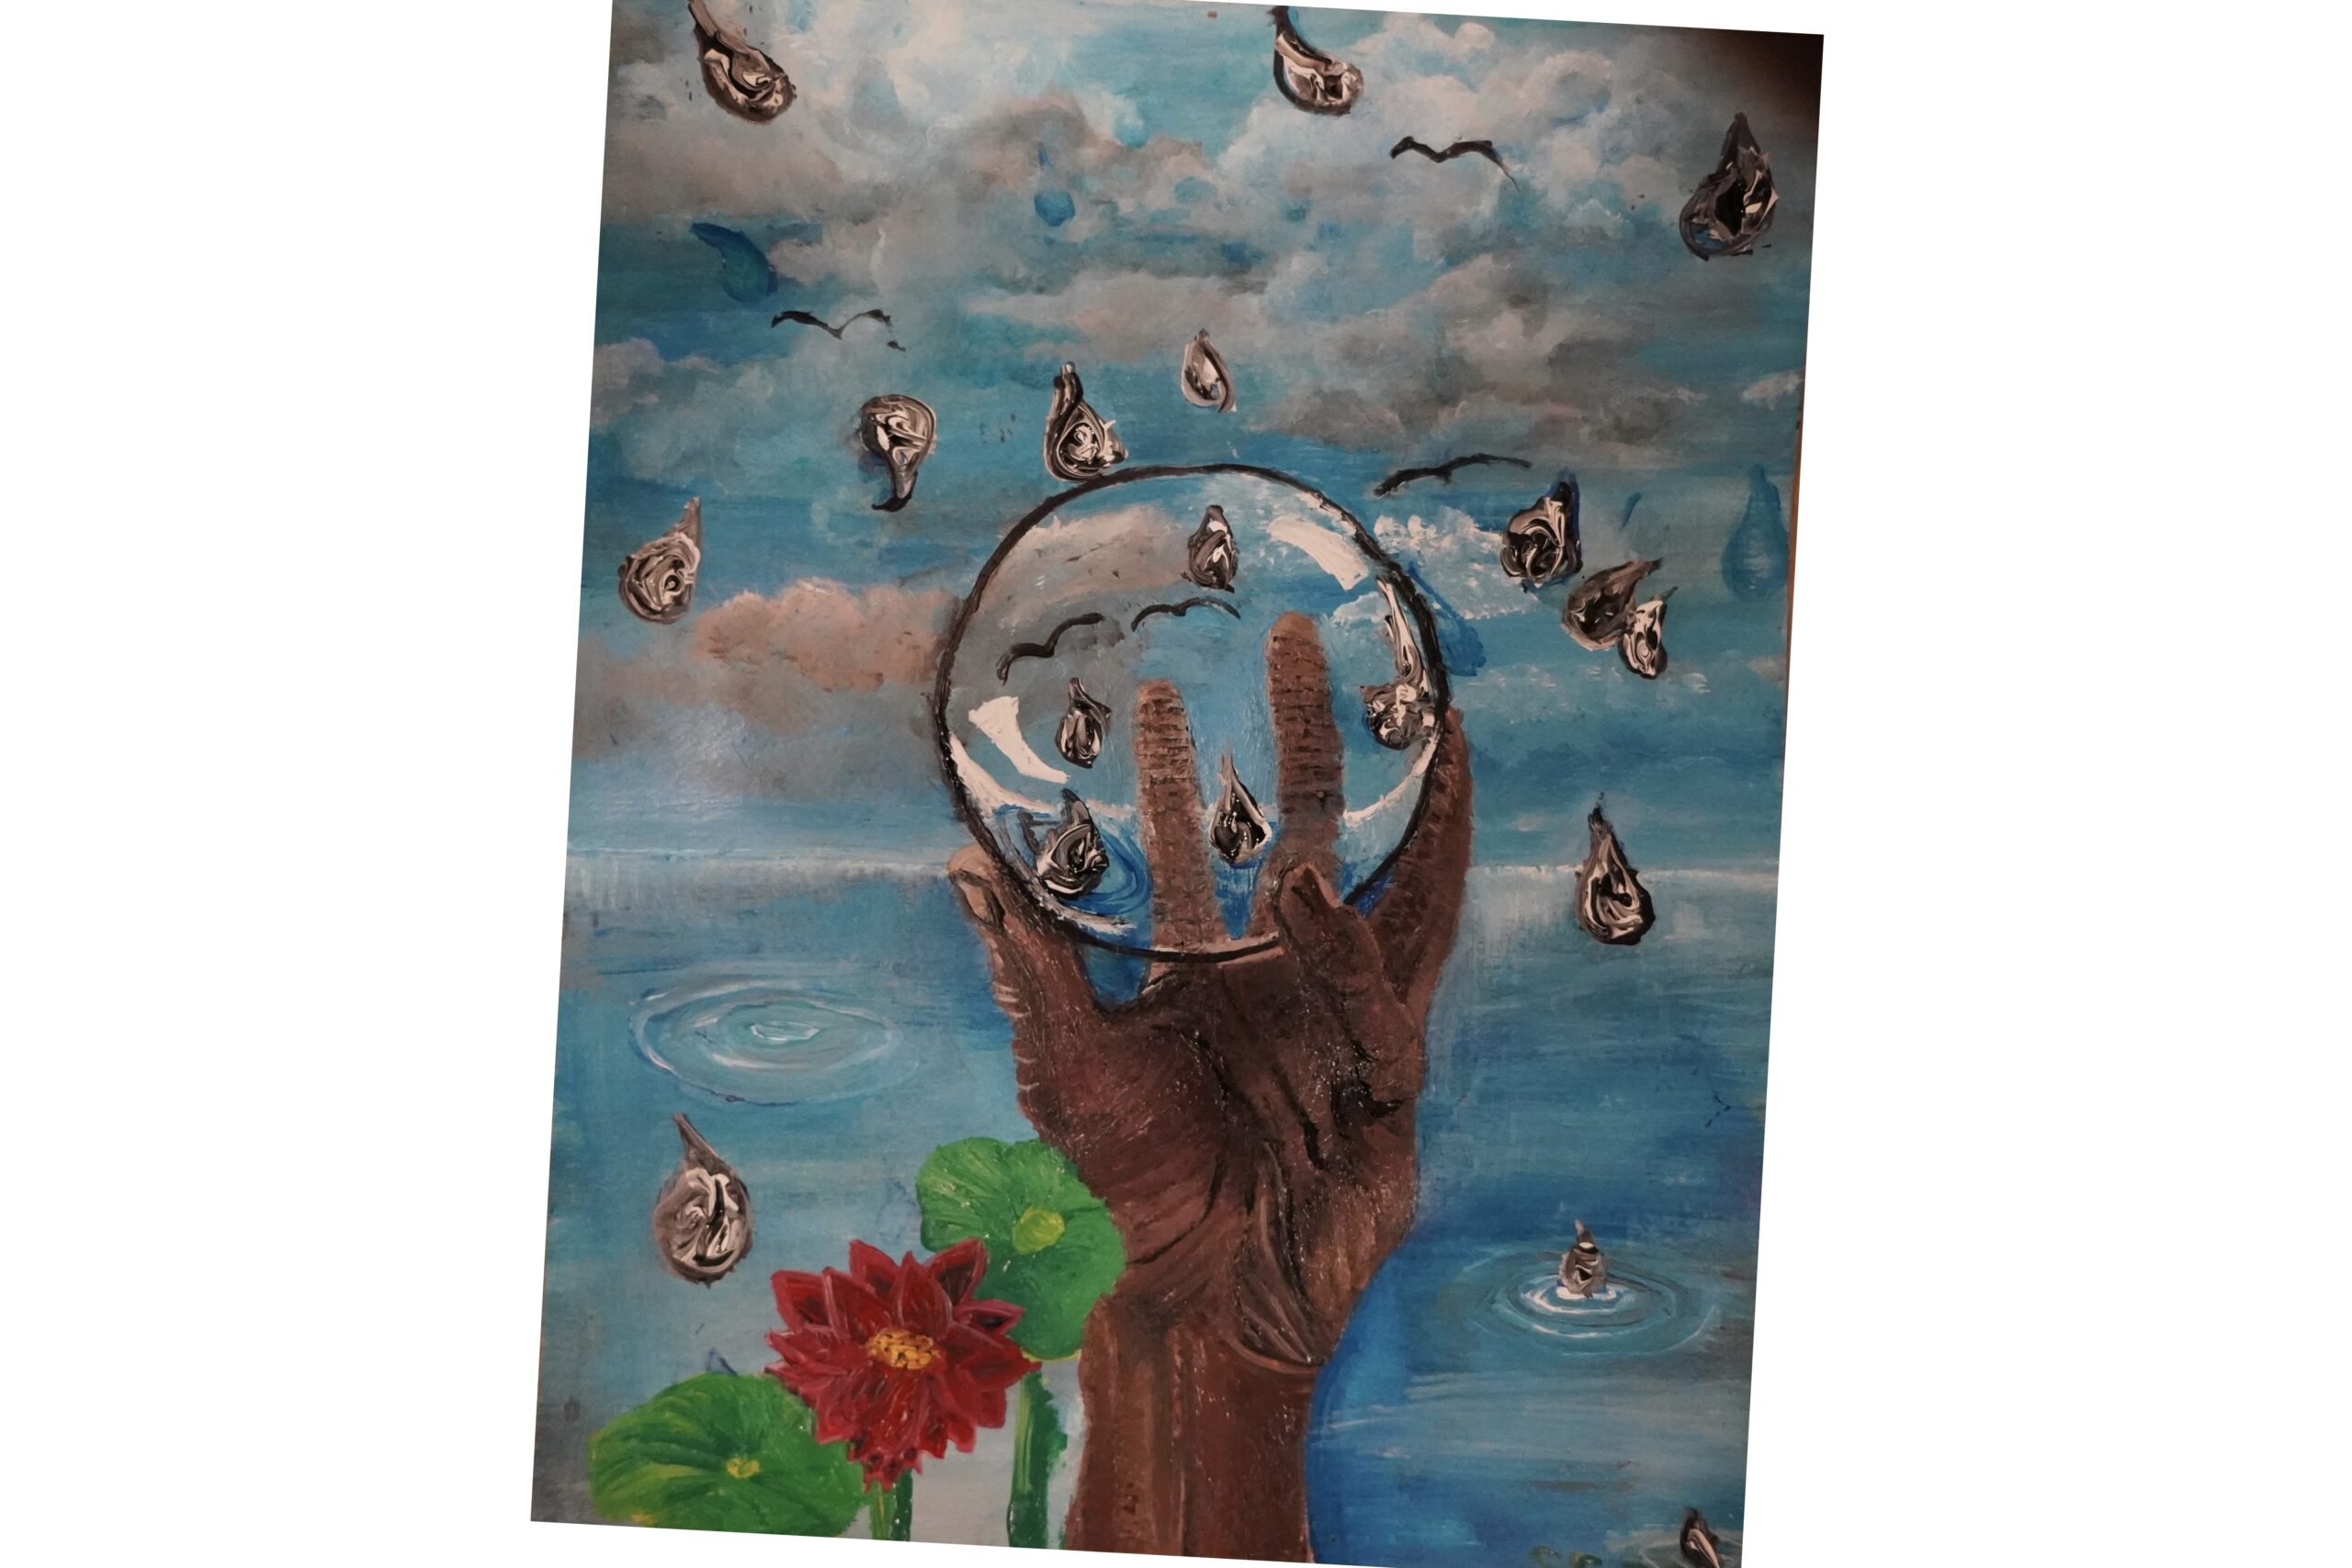 This painting signifies equanimity. In the middle ground is a dark-skinned hand with wrinkles depicted similarly to railroad tracks on the fingers. The hand is holding a clear, empty sphere. In the background is a blue lake, and in the sphere the water in the lake is shown refracted as viewed through the sphere curved at the edges and raised up a few percent of the sphere's radius. There is a red lotus in the foreground and black and white rain droplets falling from the sky.